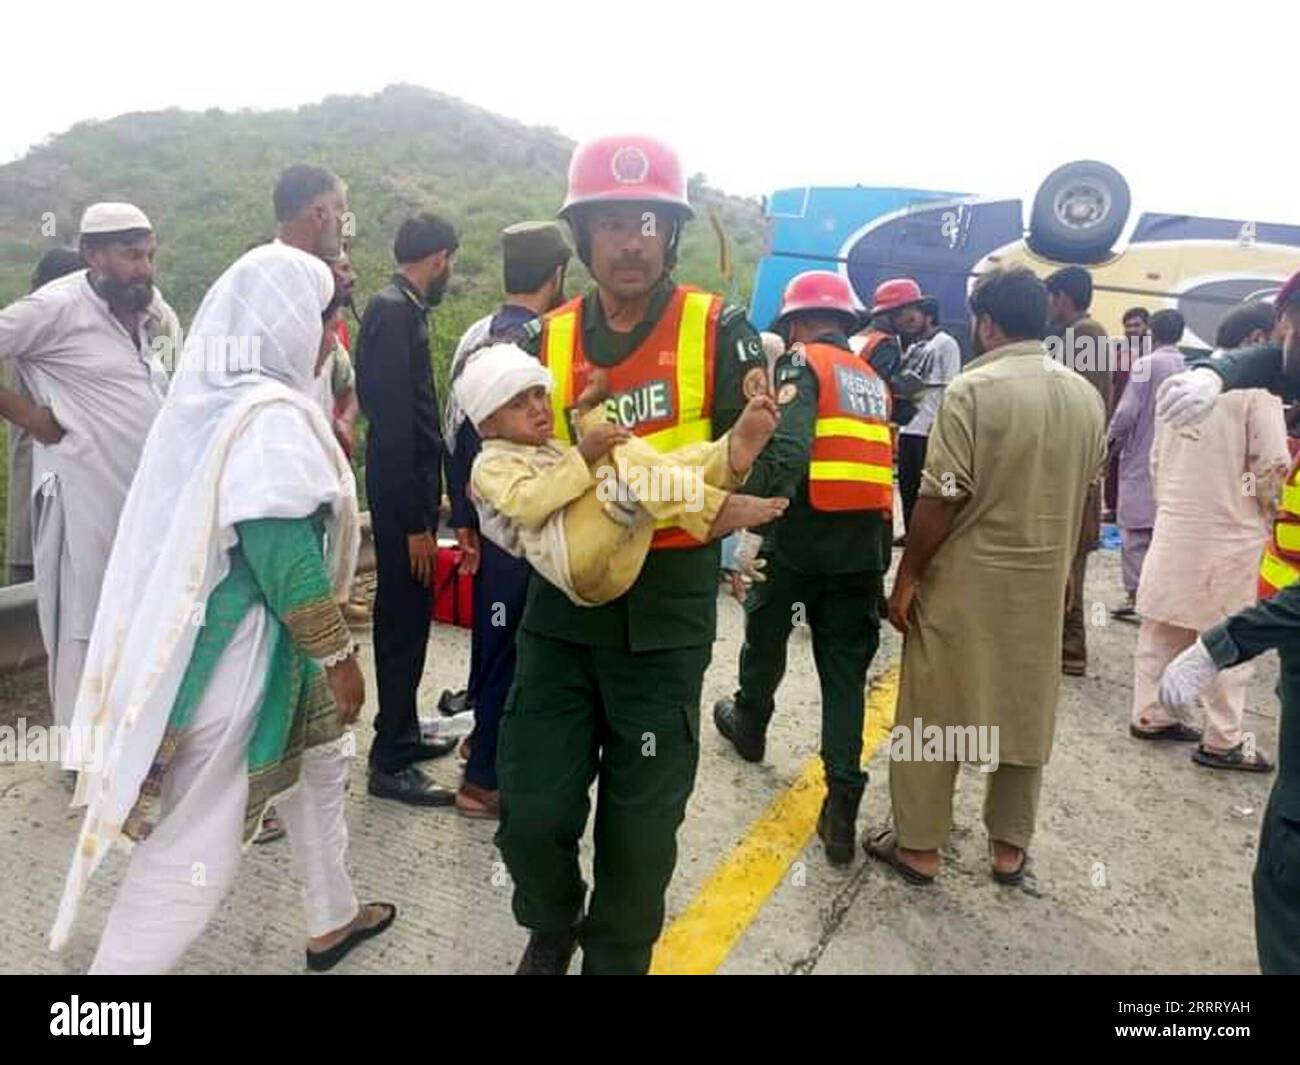 230618 -- CHAKWAL, June 18, 2023 -- A rescuer holds a child at a road accident site in Chakwal district of Pakistan s eastern Punjab province on June 17, 2023. At least 14 people were killed and over 20 others injured when a passenger bus turned turtle in Chakwal district of Pakistan s eastern Punjab province on Saturday, police officers said. The accident took place on the motorway near Kallar Kahar area of the district when the driver of the bus lost control of the vehicle due to brake failure, leading to the tragic crash, Deputy Inspector General of National Highways and Motorway Police Muh Stock Photo